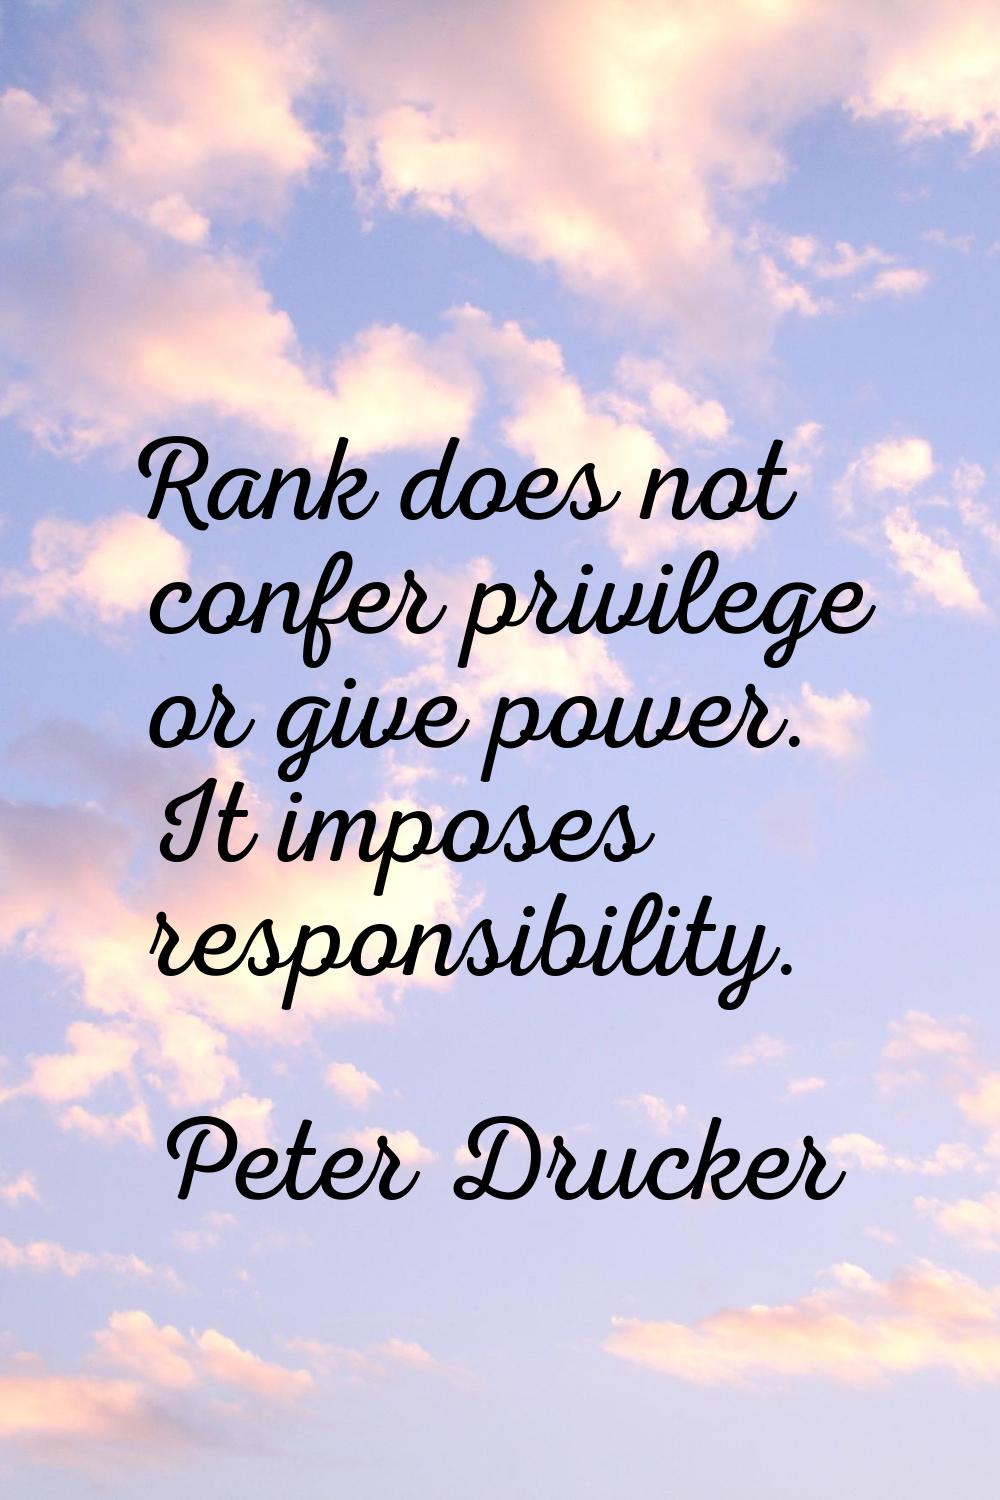 Rank does not confer privilege or give power. It imposes responsibility.